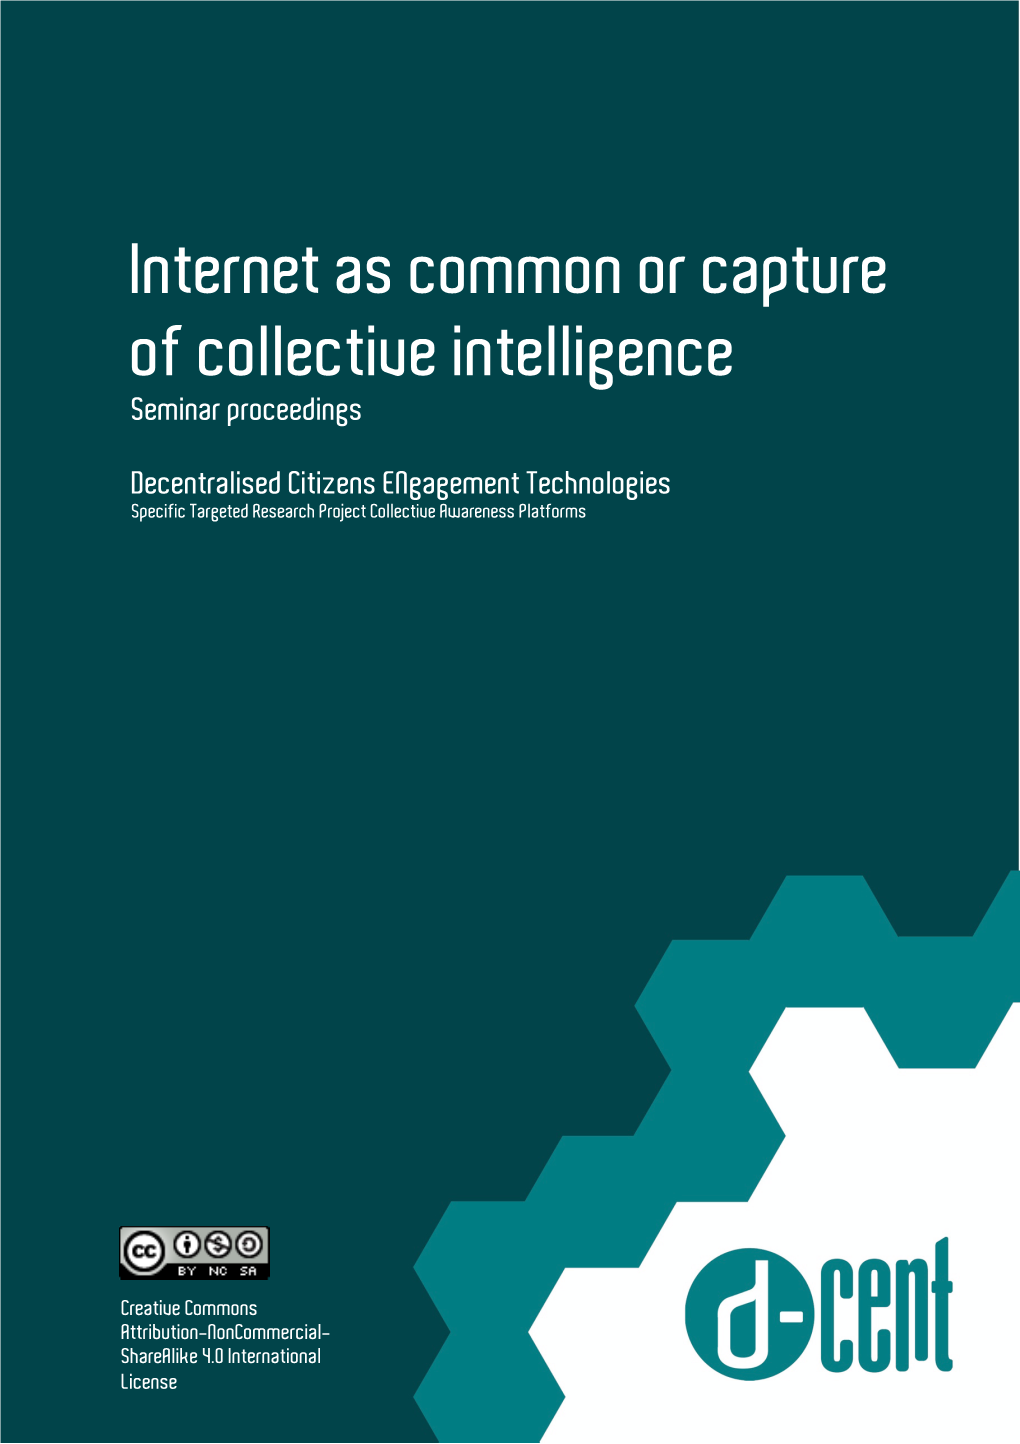 Internet As Common Or Capture of Collective Intelligence Seminar Proceedings